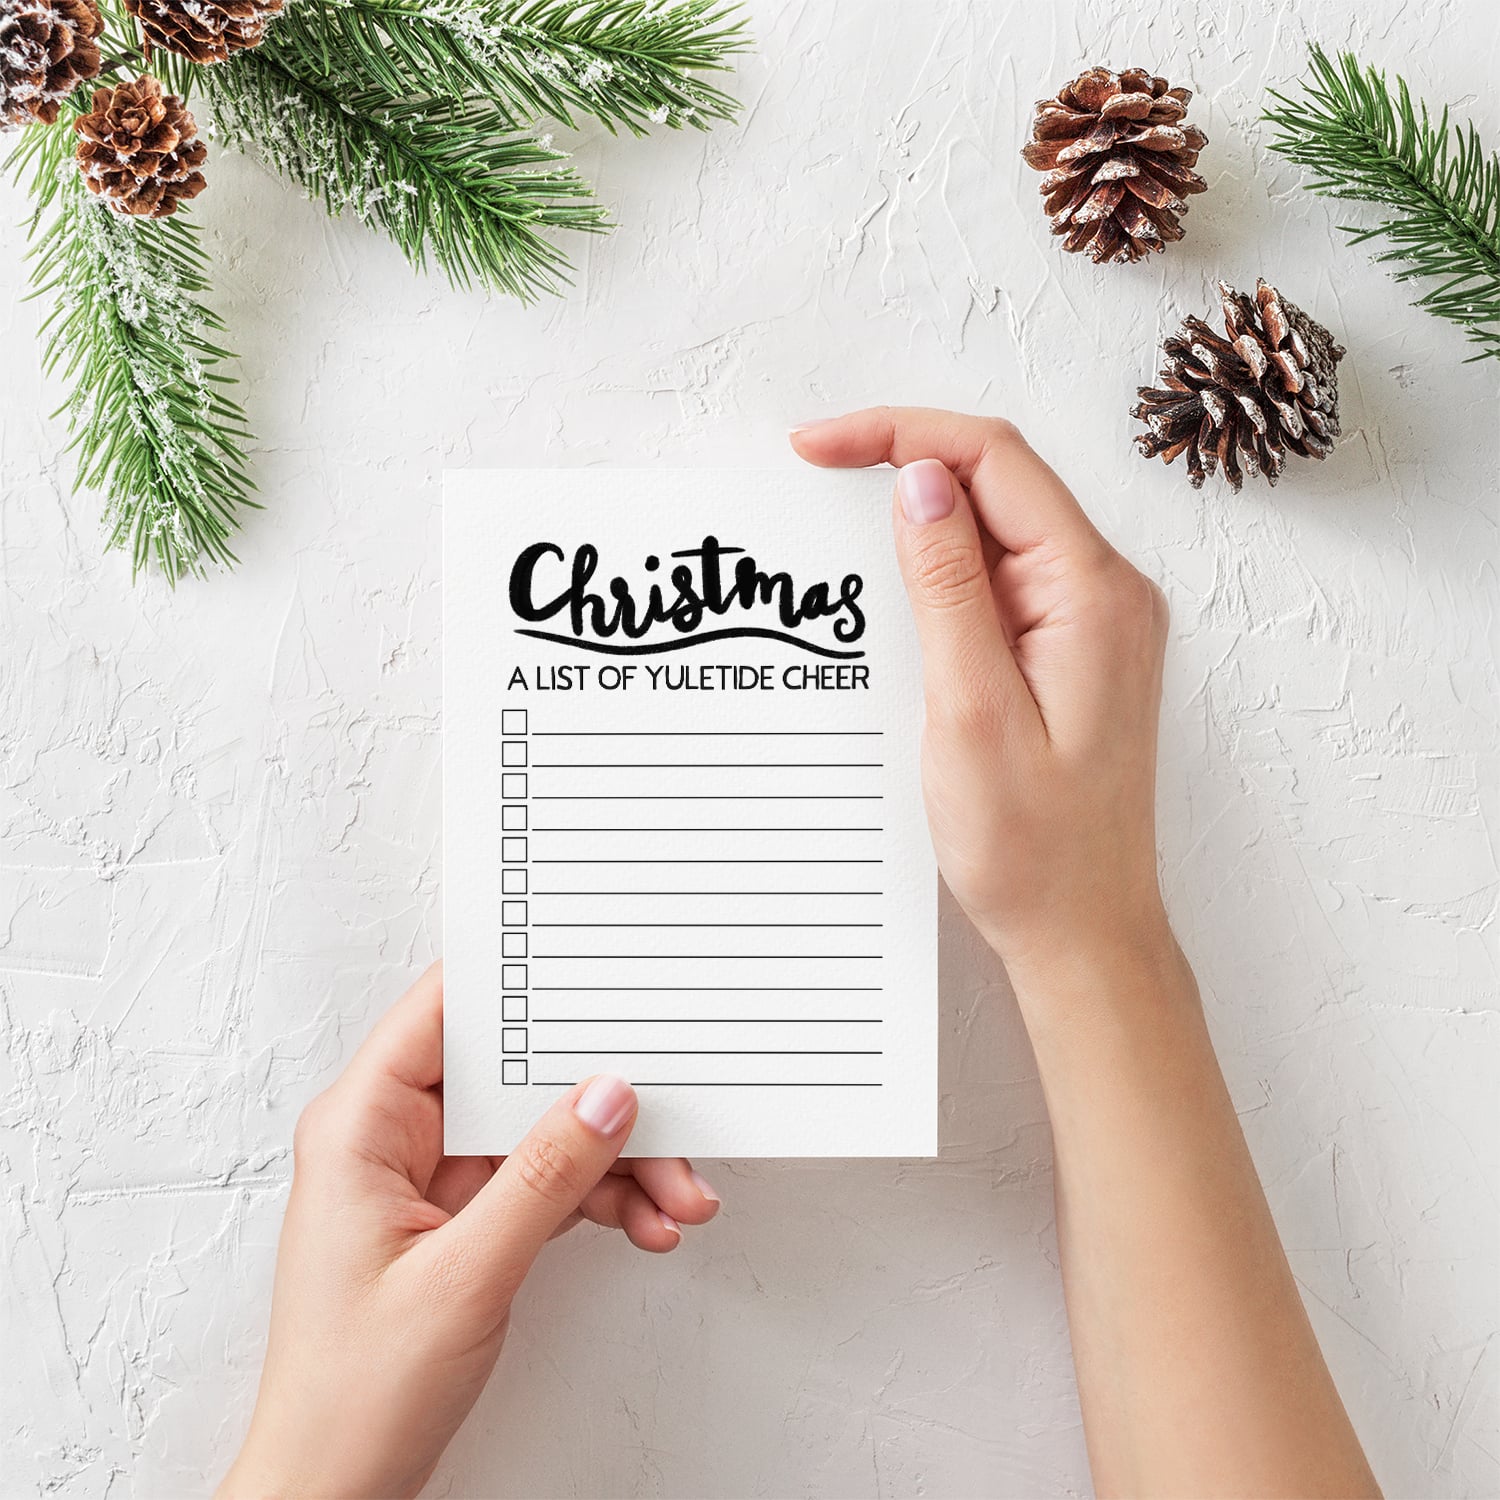 Christmas Bucket List Free Printable • Little Gold Pixel • In which I offer a Christmas bucket list free printable, for those of us eager to spread holiday cheer but too lazy to commit to a full advent calendar.